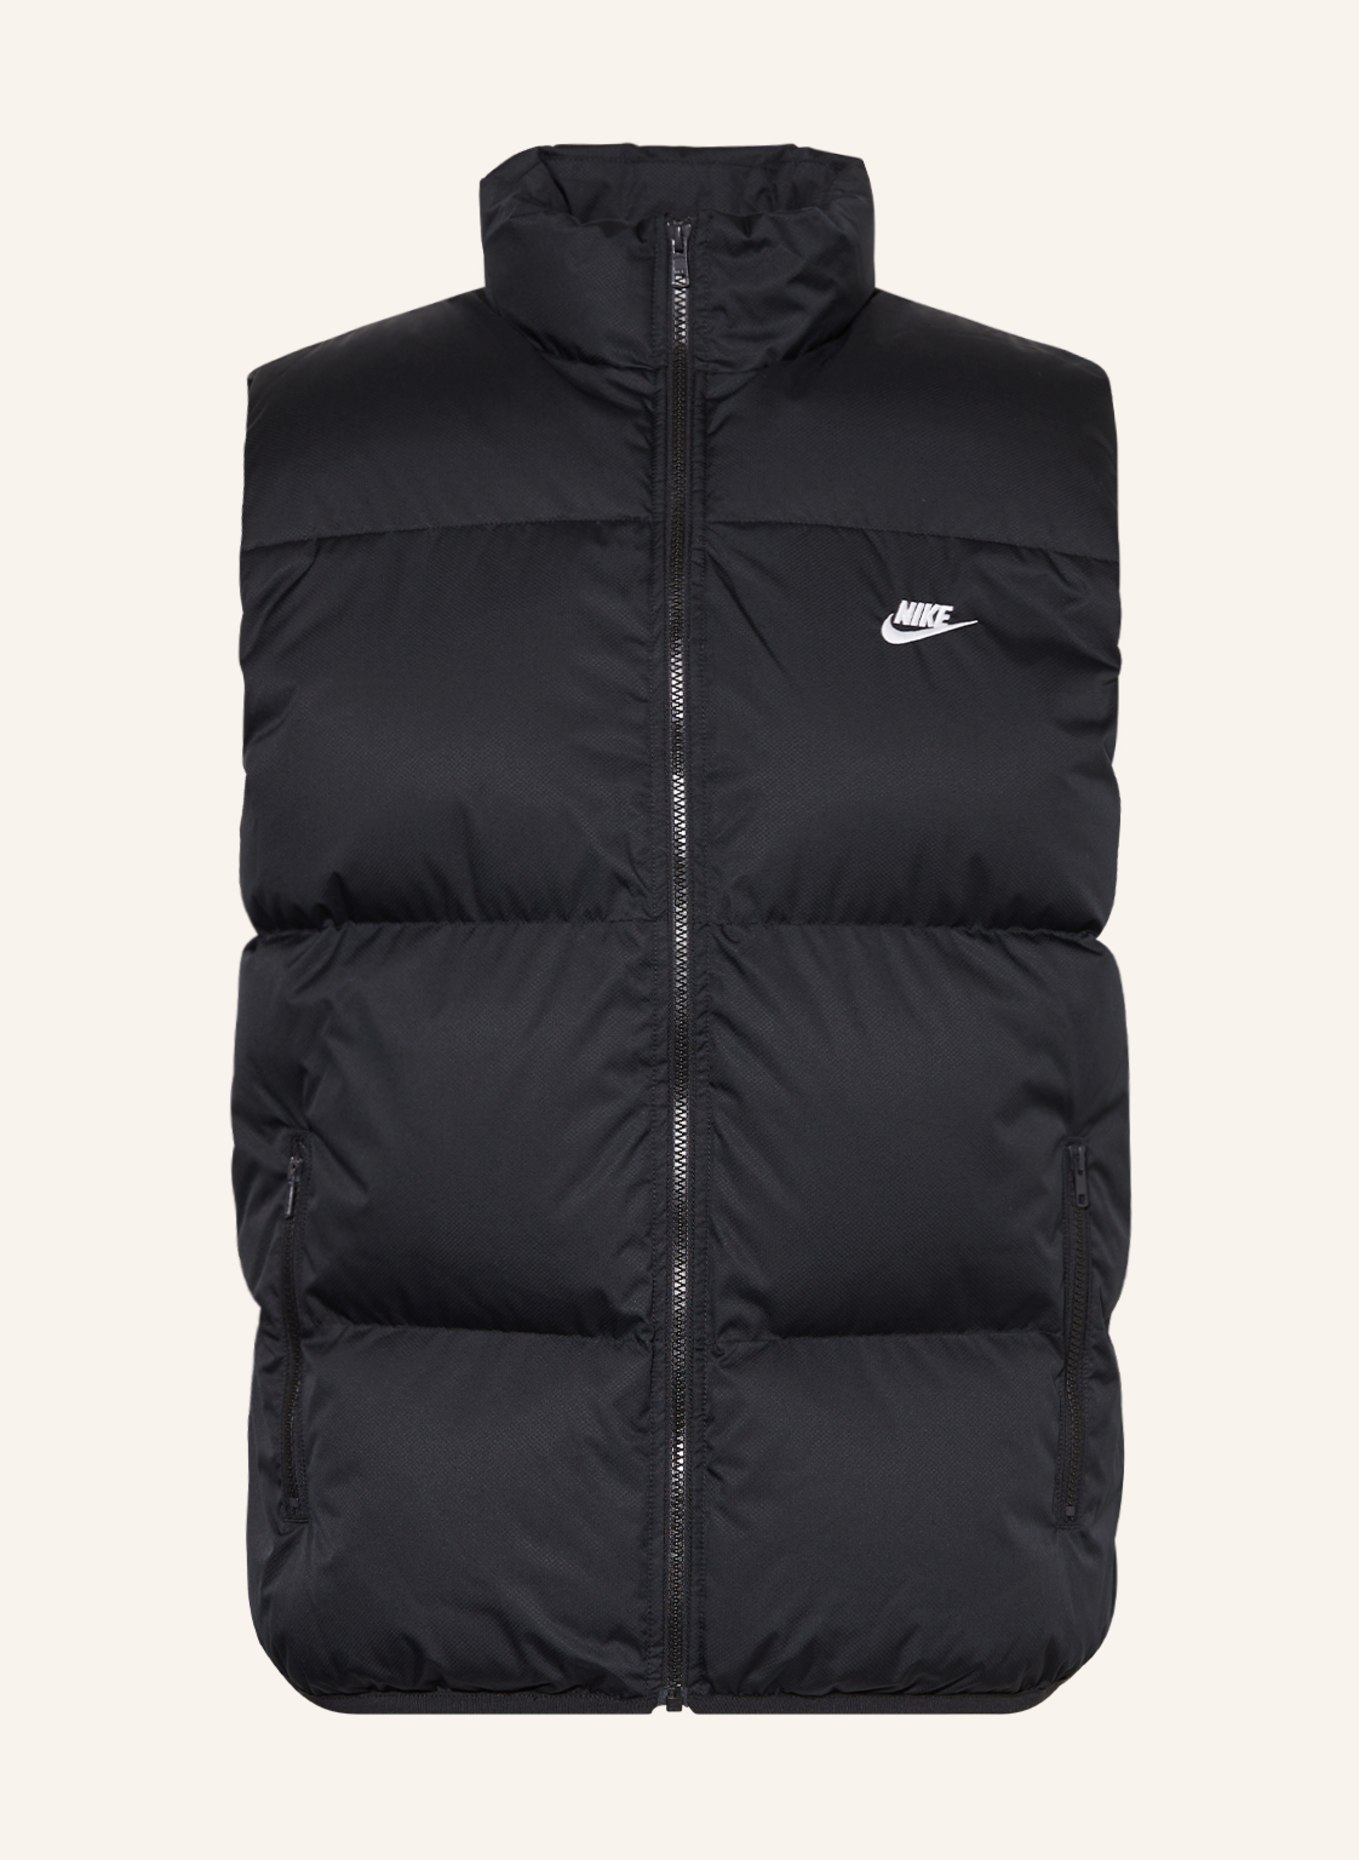 vest Quilted black in Nike